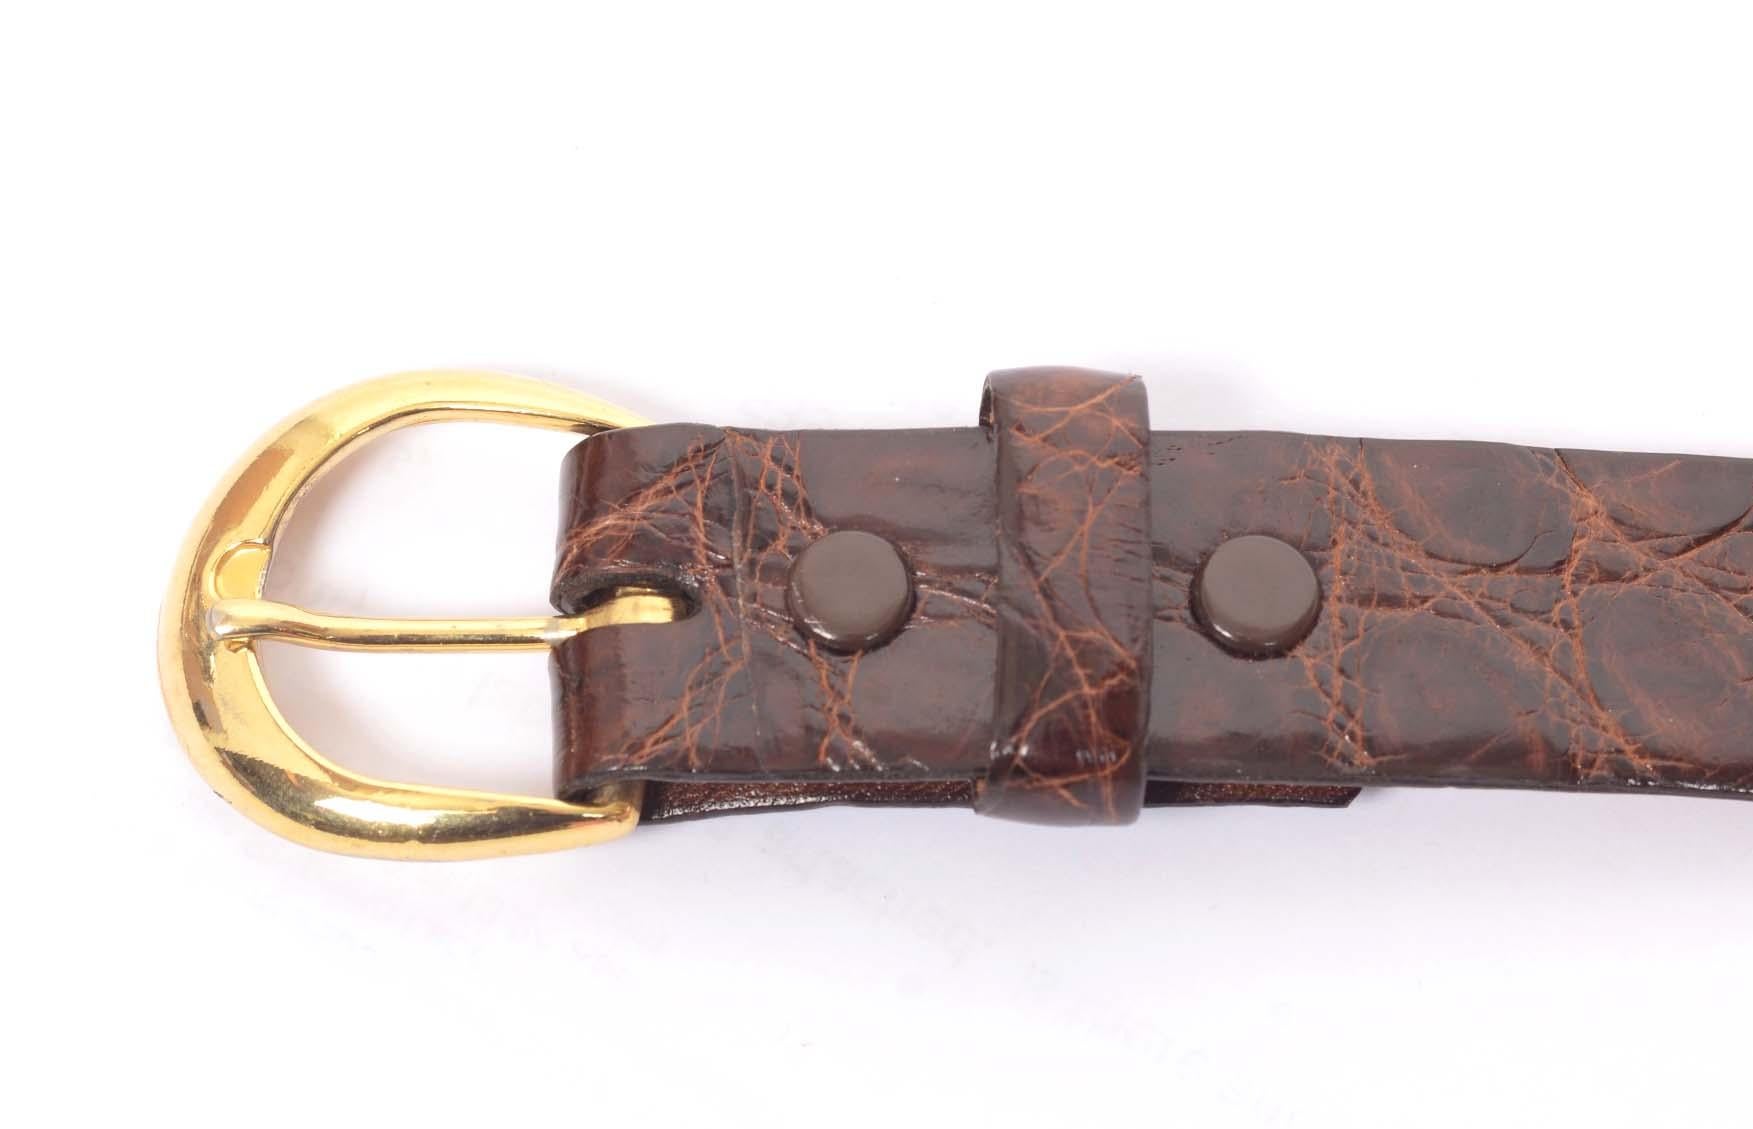 1960's Tex Tan brown alligator skin belt has a gold tone d-ring notched closure with 5 notches and is lined in brown cowhide. From domestic tanned alligator.

Additional measurements- Waist 23